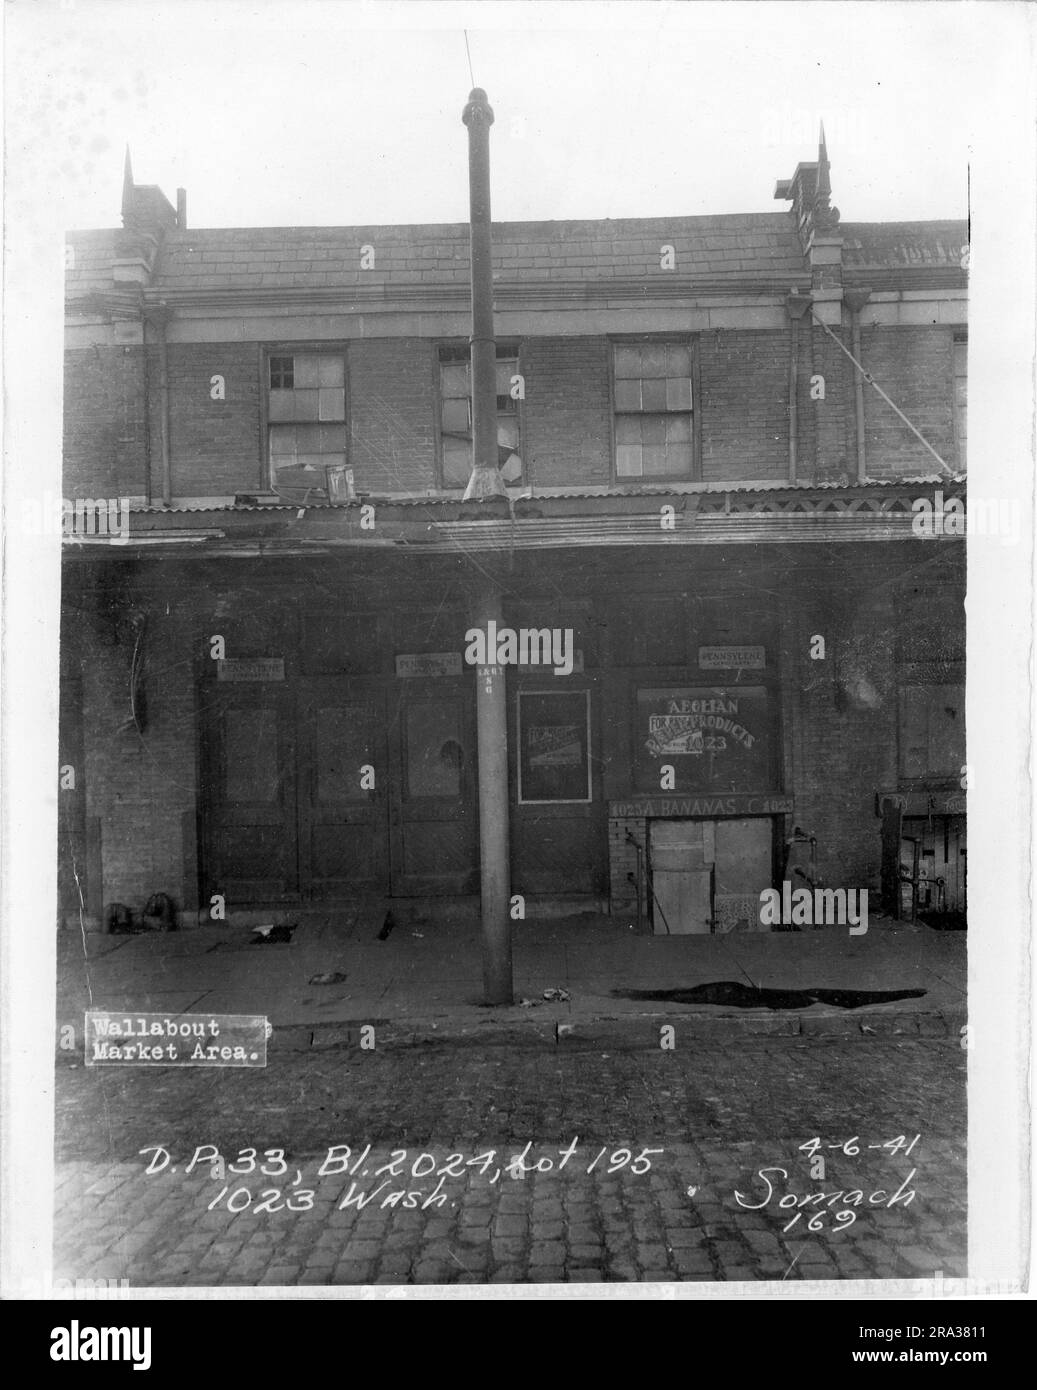 Photograph of exterior of lot 195, Bl. 2024, 1023 Wash.. Depicts exterior of building with signs for Aeolian Paper Products, and bananas. Stock Photo